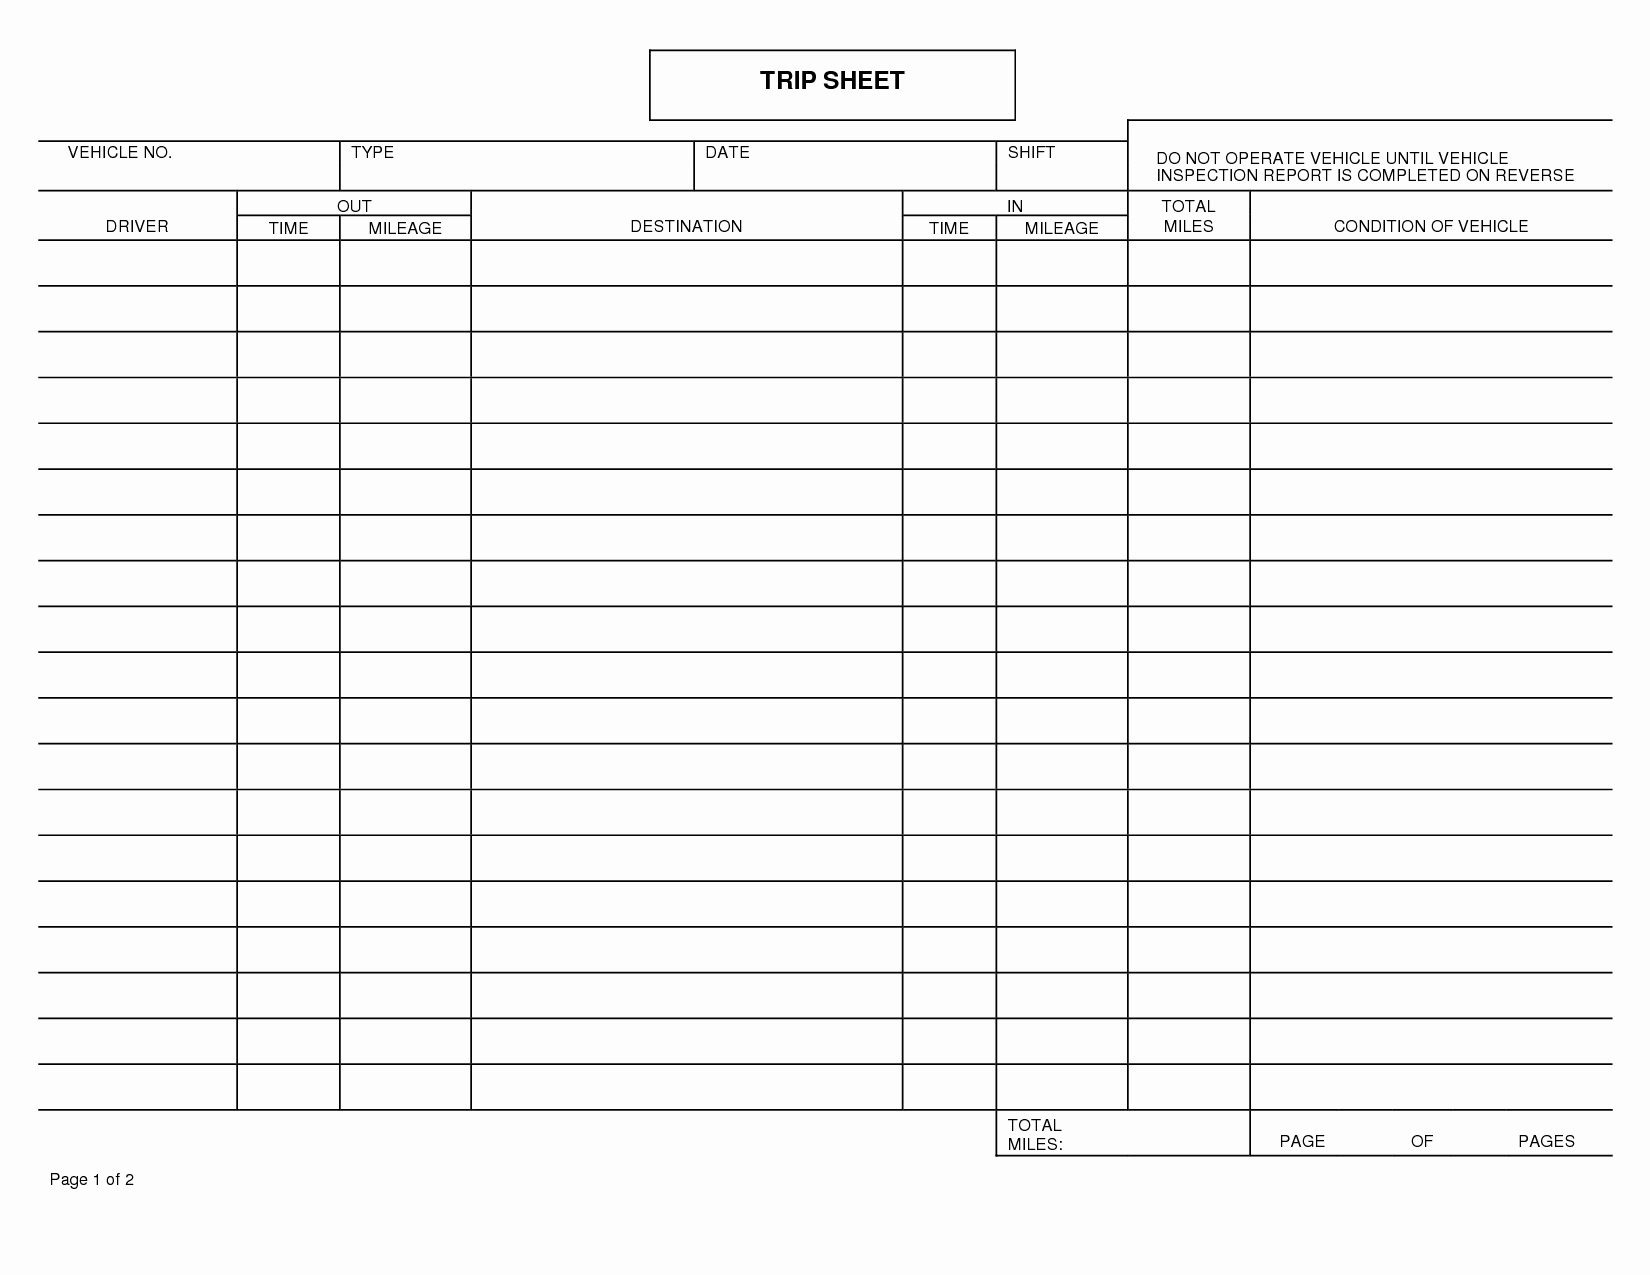 7 Best Of Free Printable Trip Sheets Driver Trip